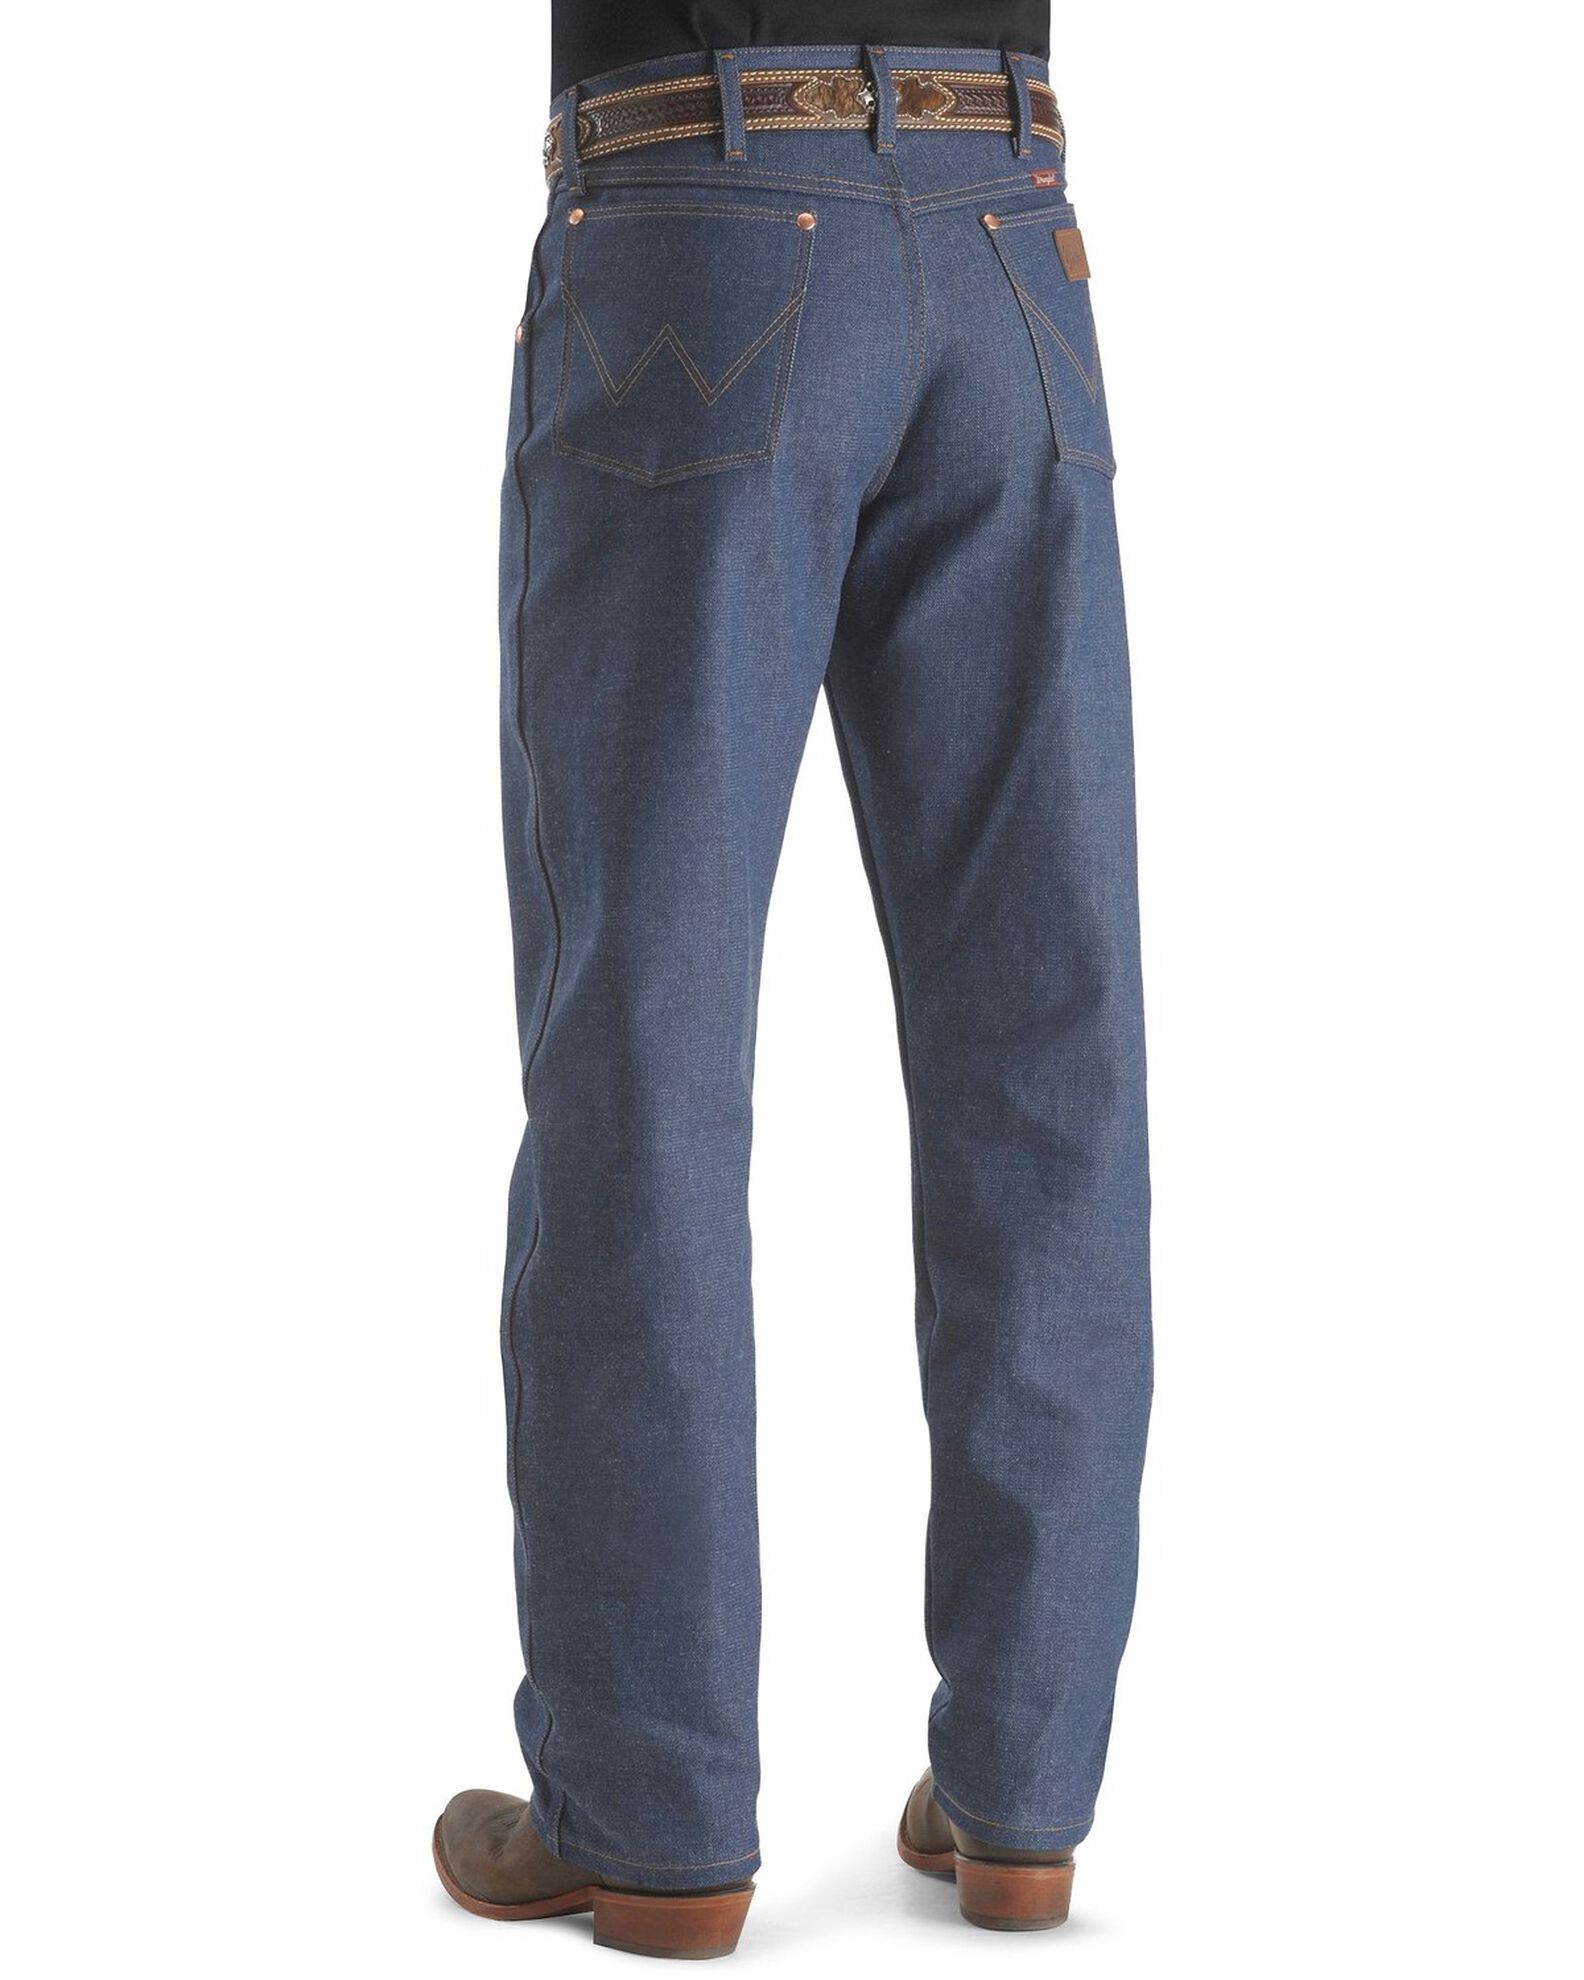 Wrangler 31MWZ Cowboy Cut Rigid Relaxed Fit Jeans | Boot Barn